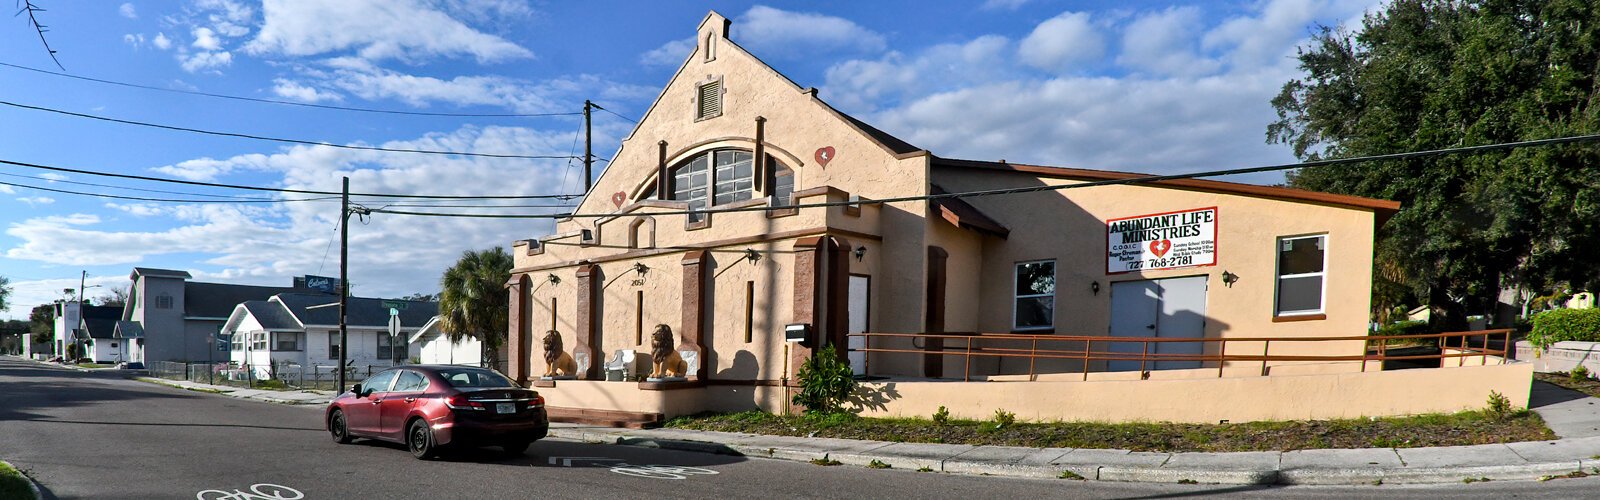 With nine historic African American churches, the Ninth Avenue South corridor is titled “Faith, Family and Education” and serves as the religious center of the community. 